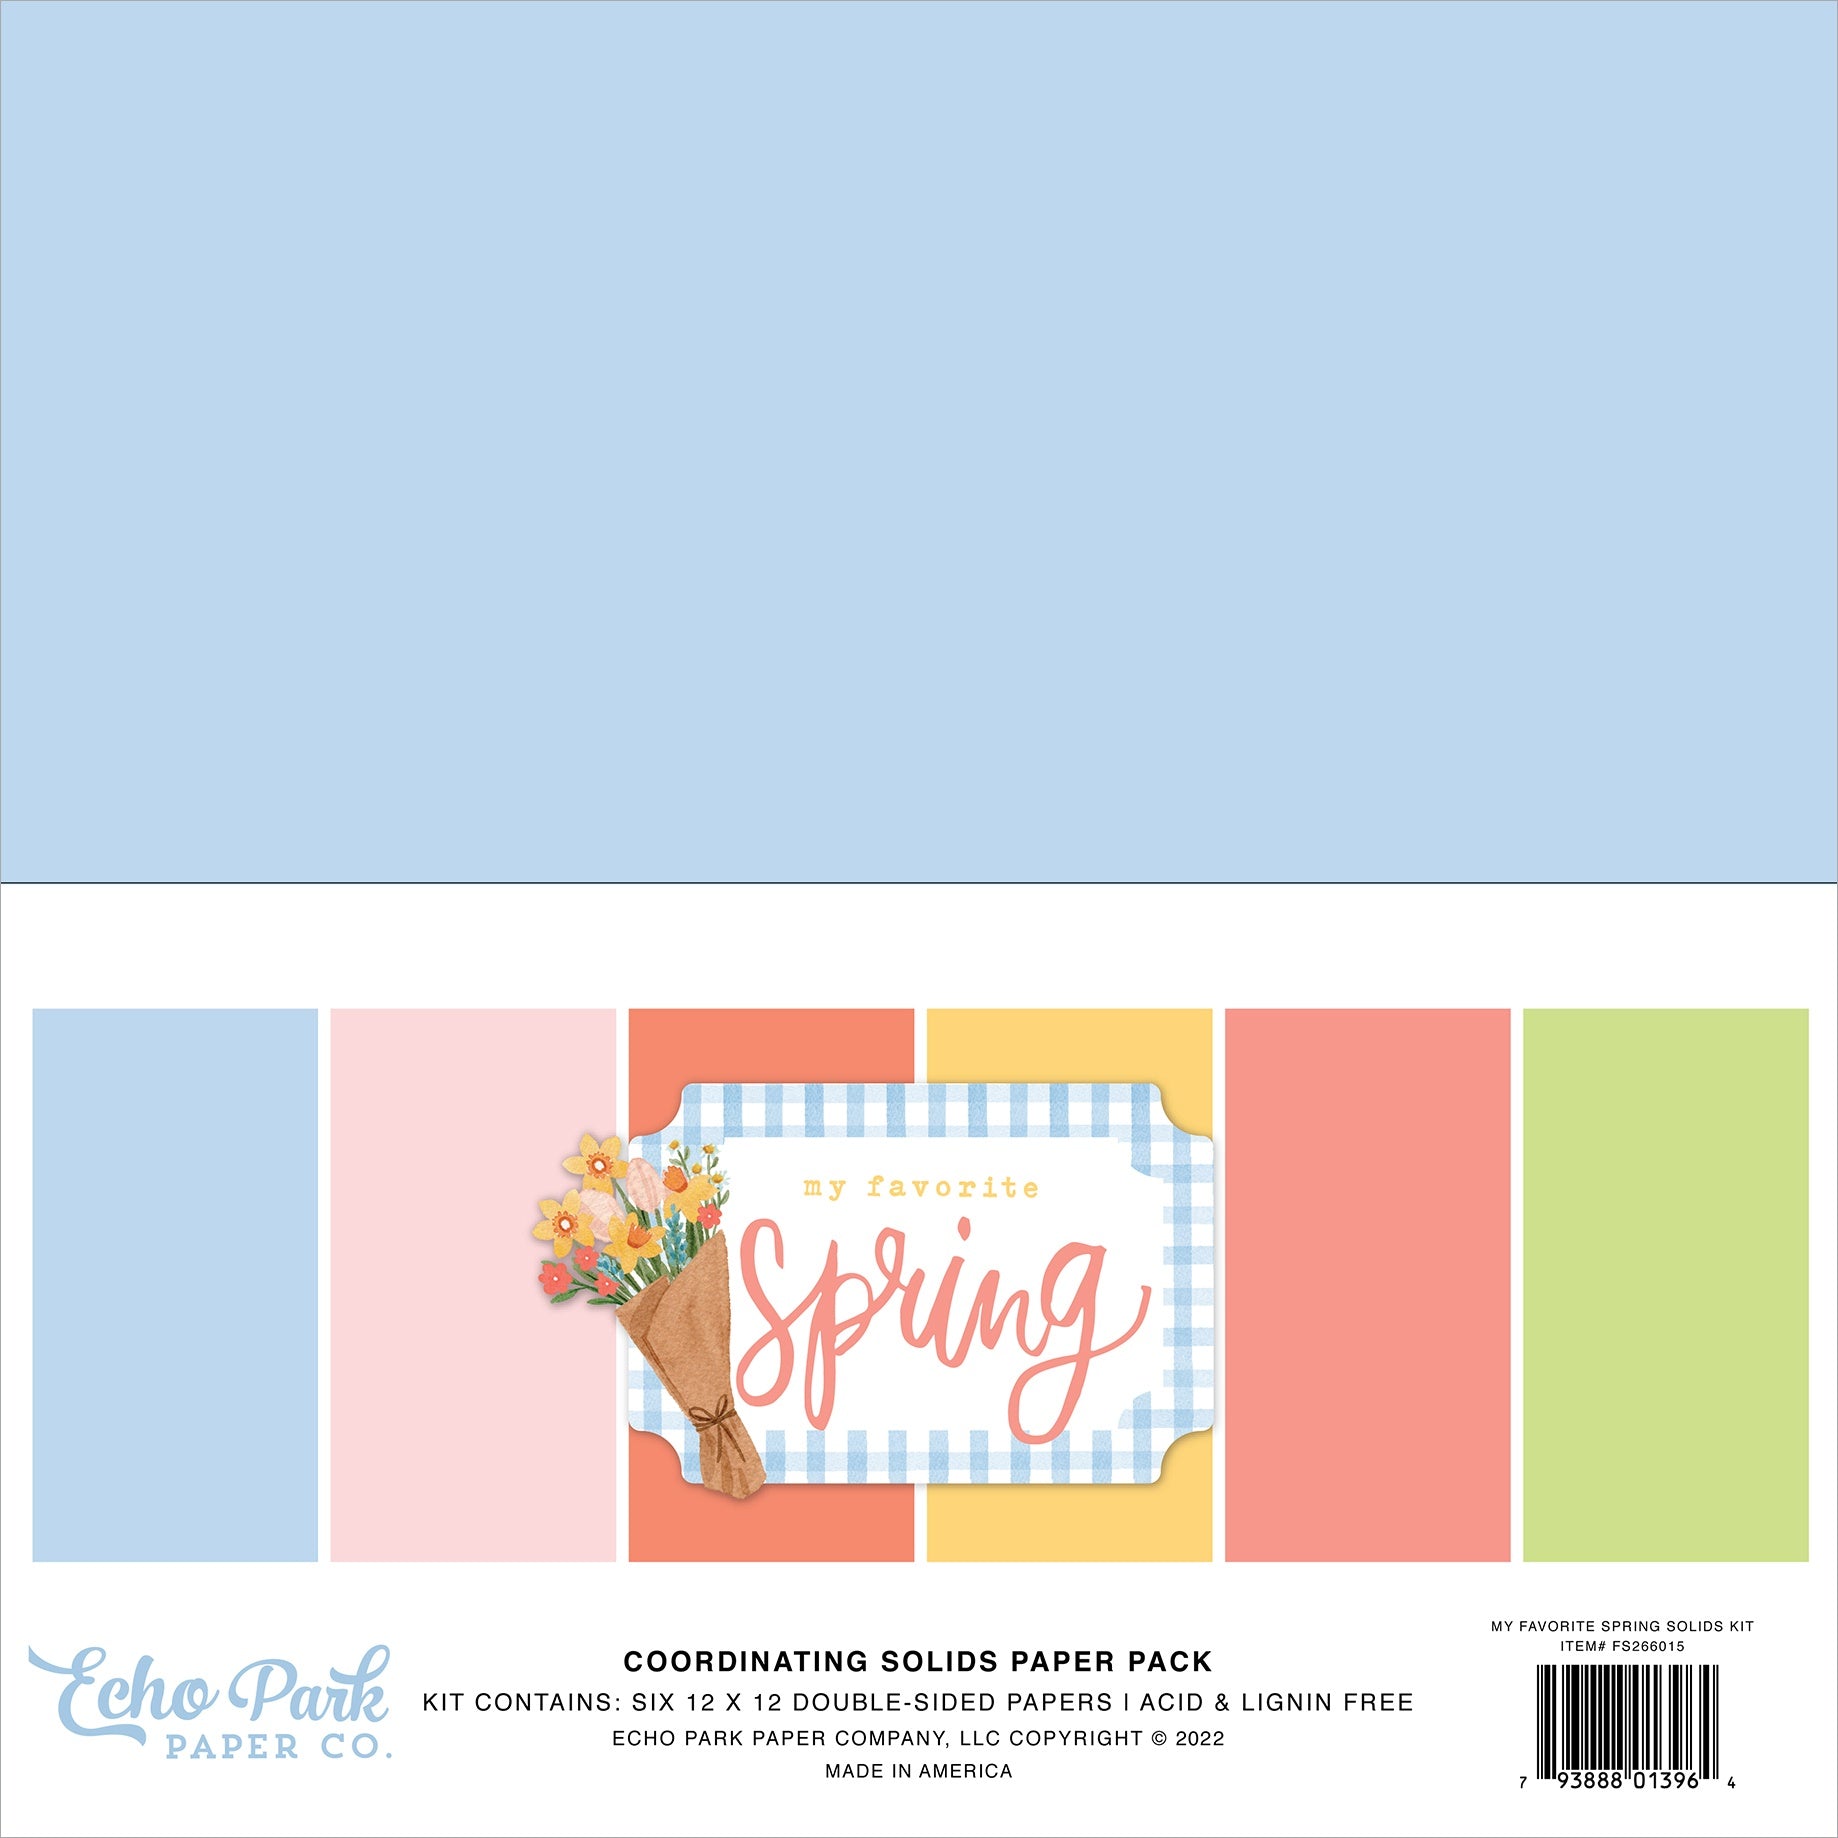 My Favorite Spring Double-Sided Solid Cardstock